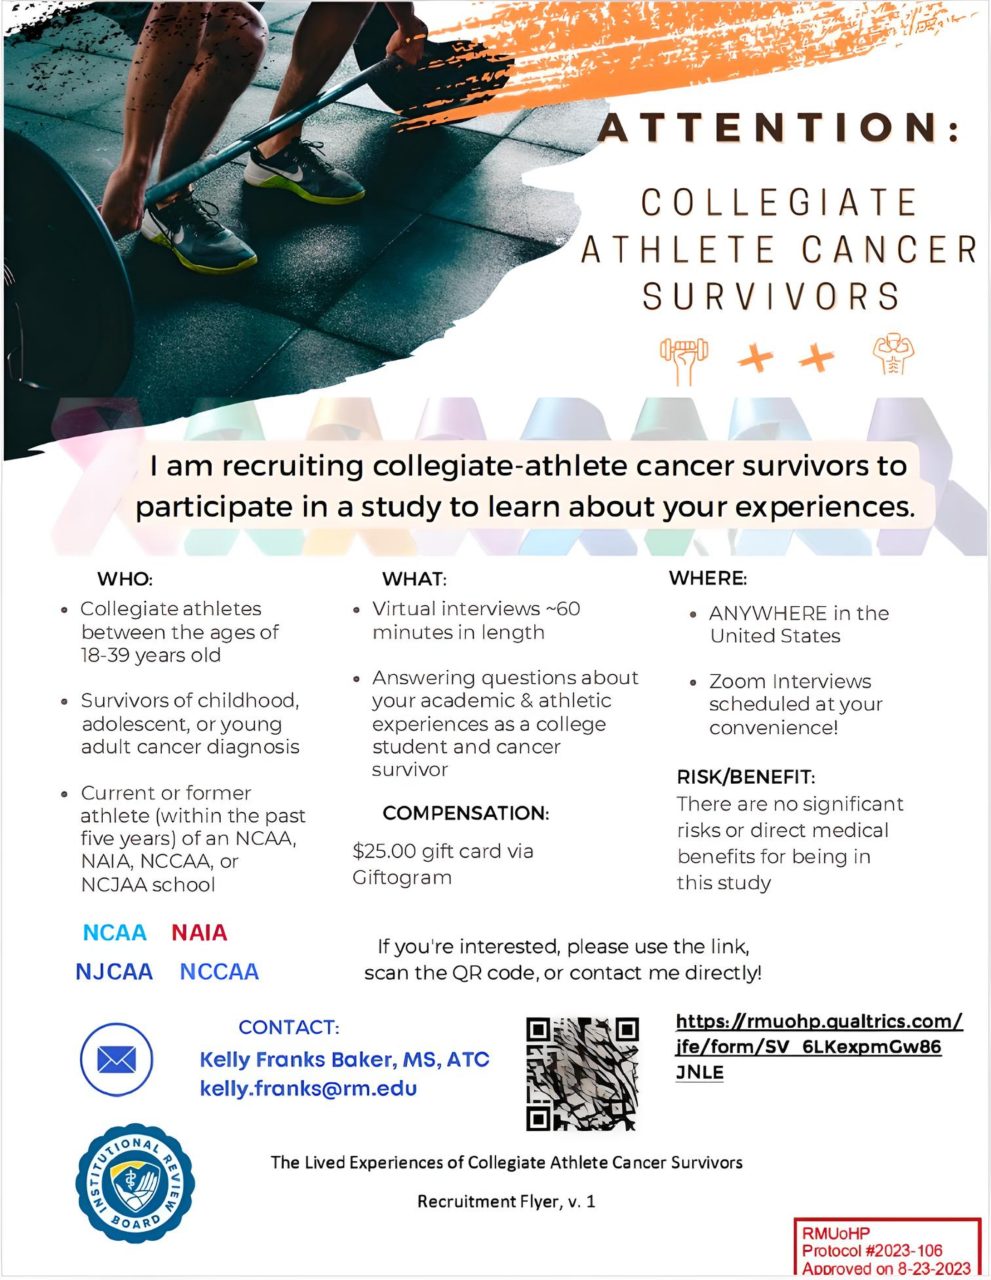 Kelly Baker: My dissertation research explores the experiences of collegiate athletes in the US diagnosed with cancer.